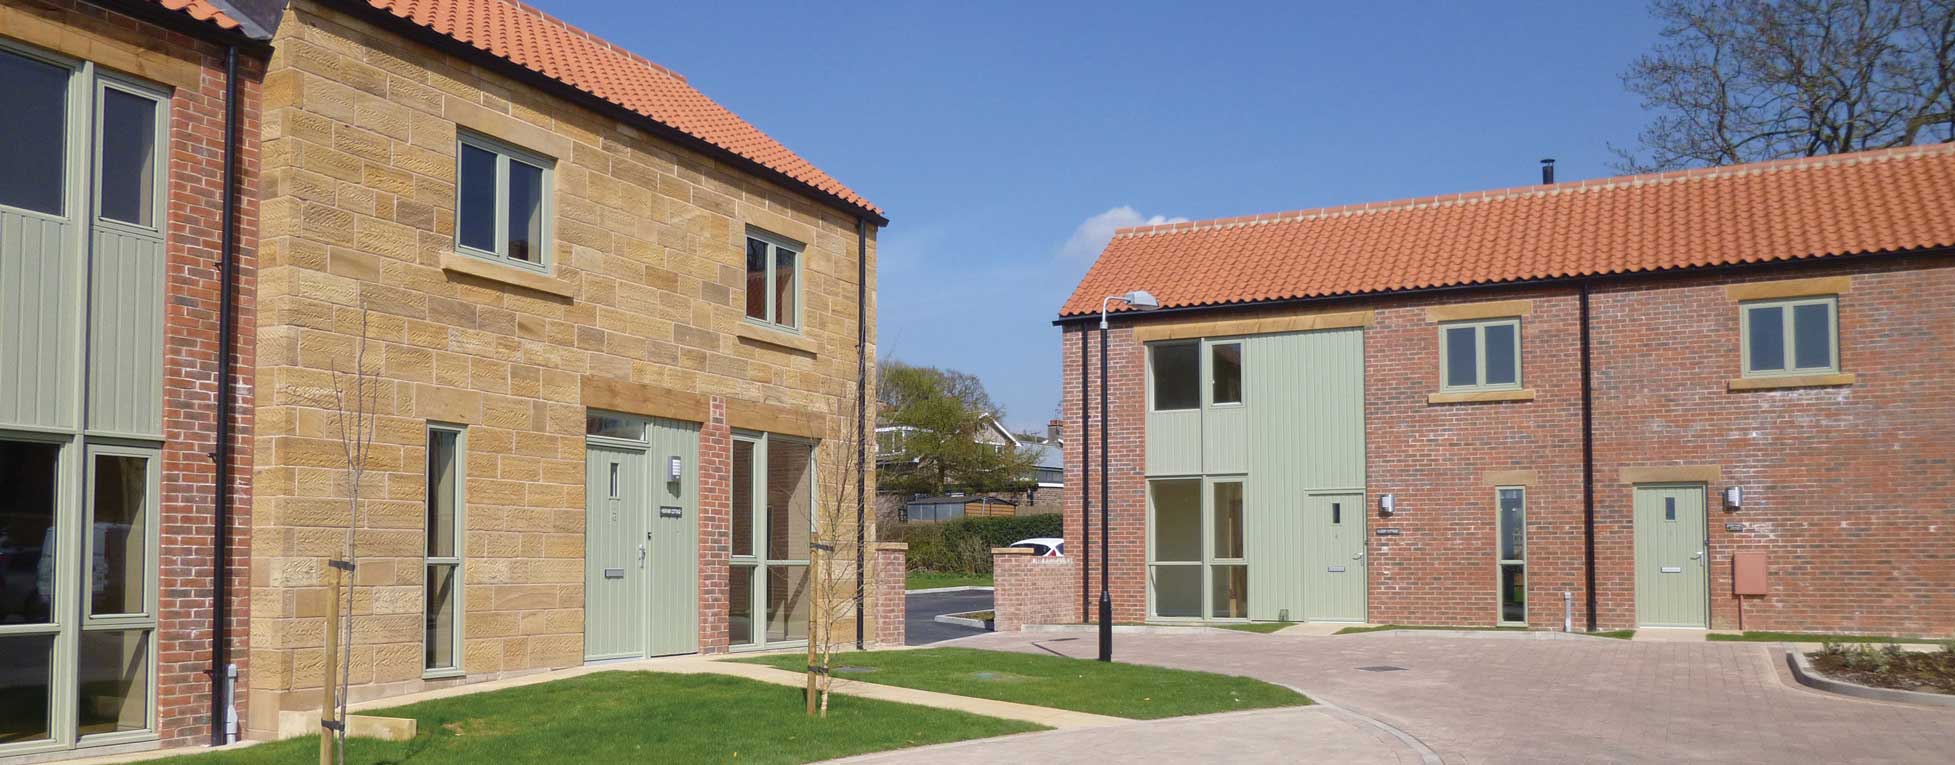 Affordable housing scheme in Osmotherley. 